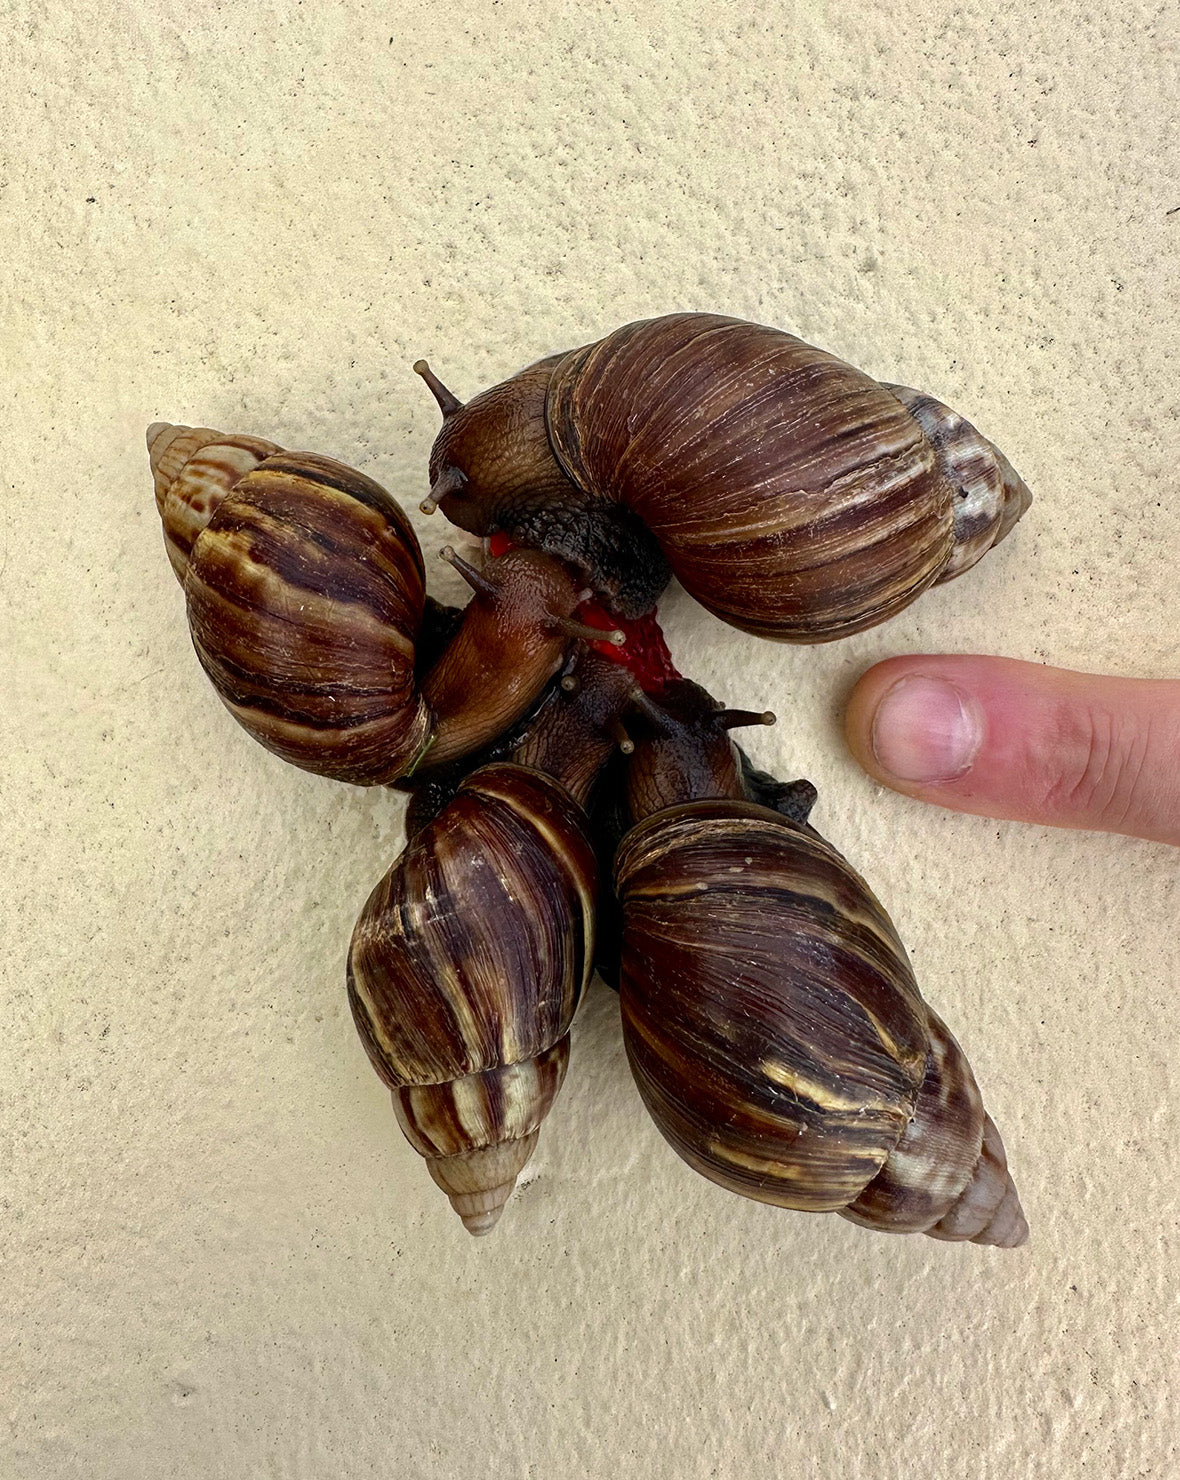 Giant African Snails in Maui, Hawaii